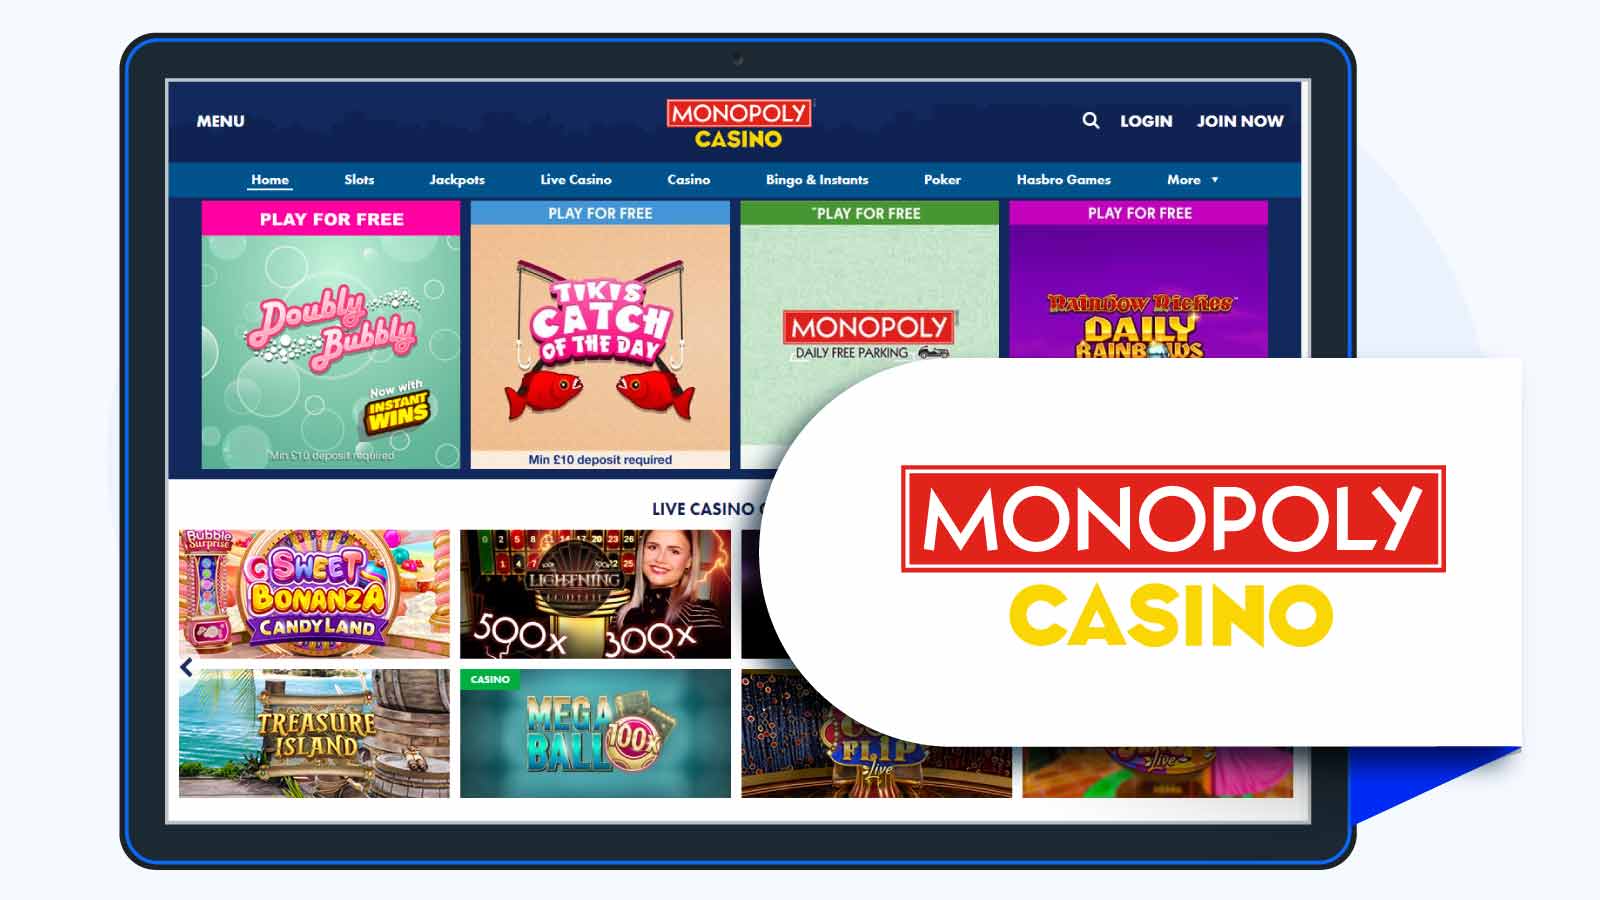 Monopoly Casino – Deposit £10 Get 30 Wager-Free Spins